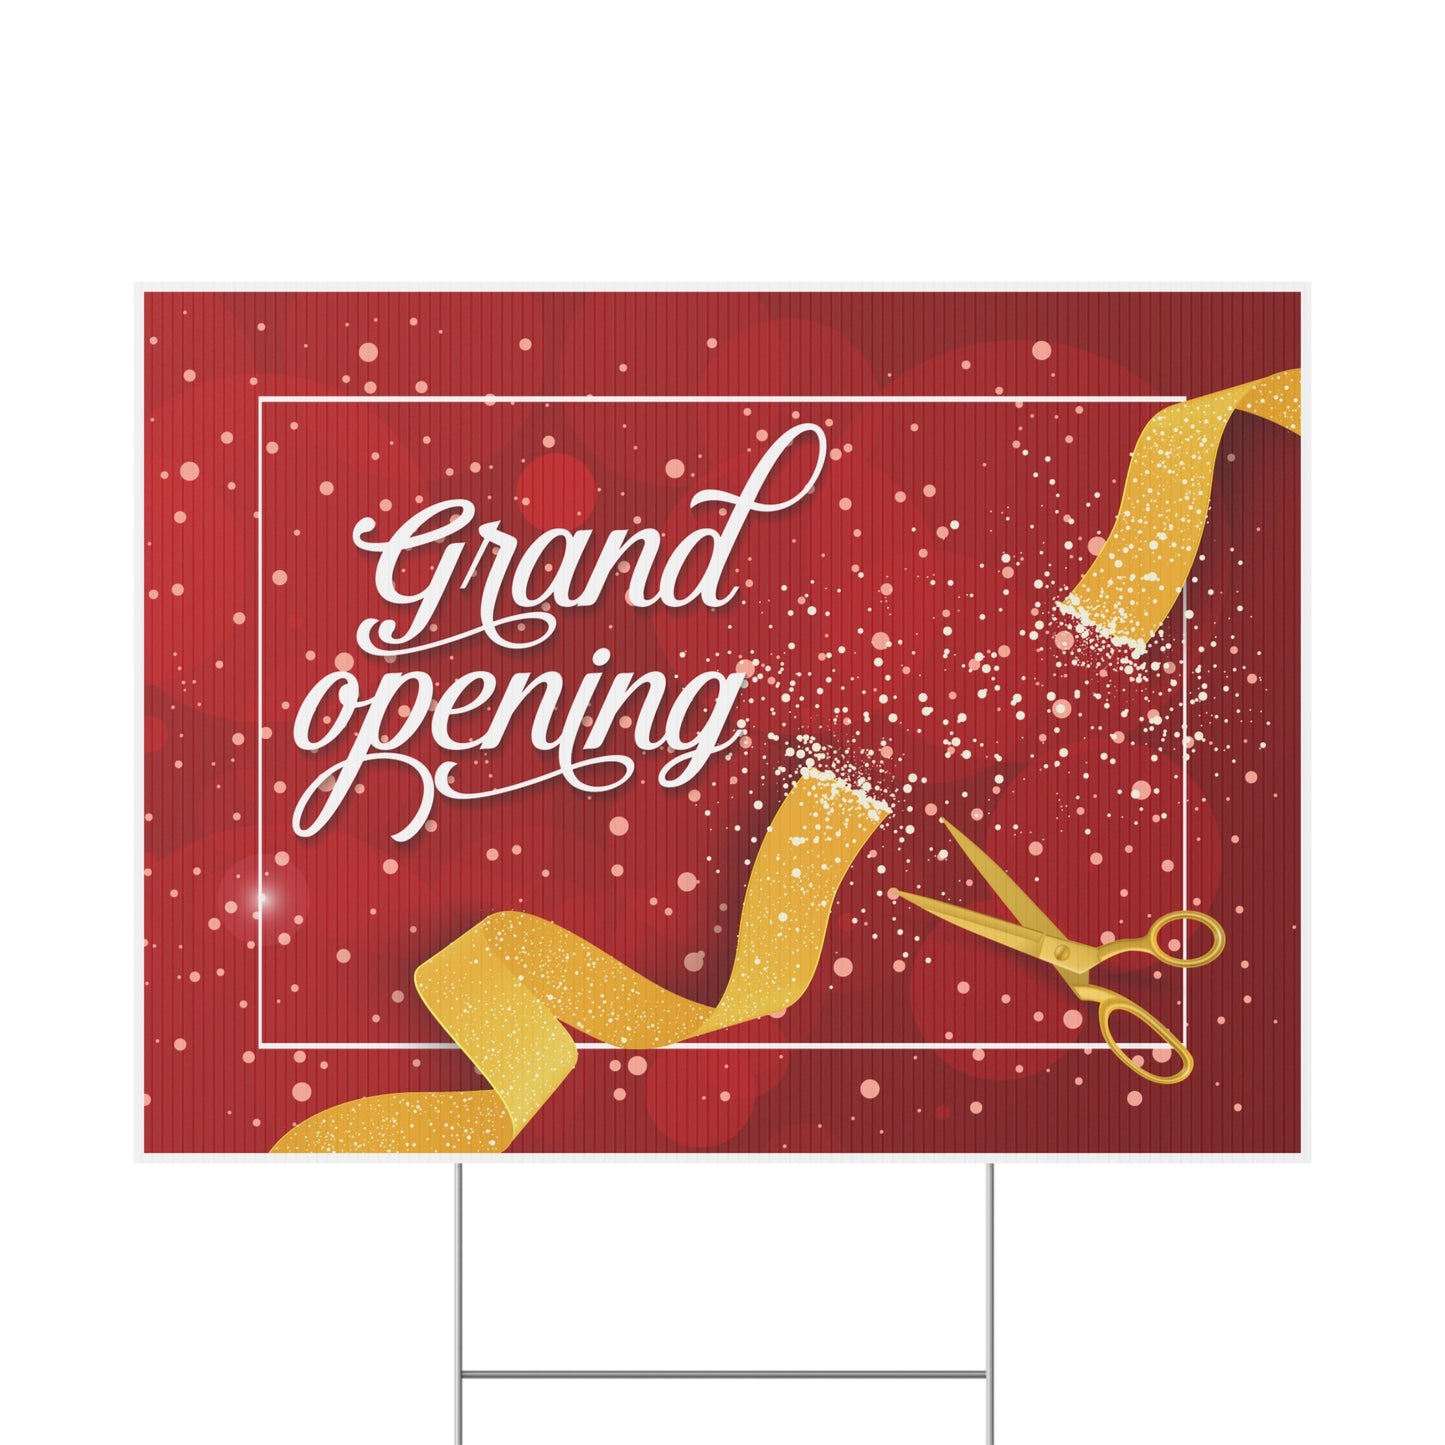 Grand Opening, Yard Sign, 18x12, 24x18, 36x24, Double Sided, H-Stake Included, v1